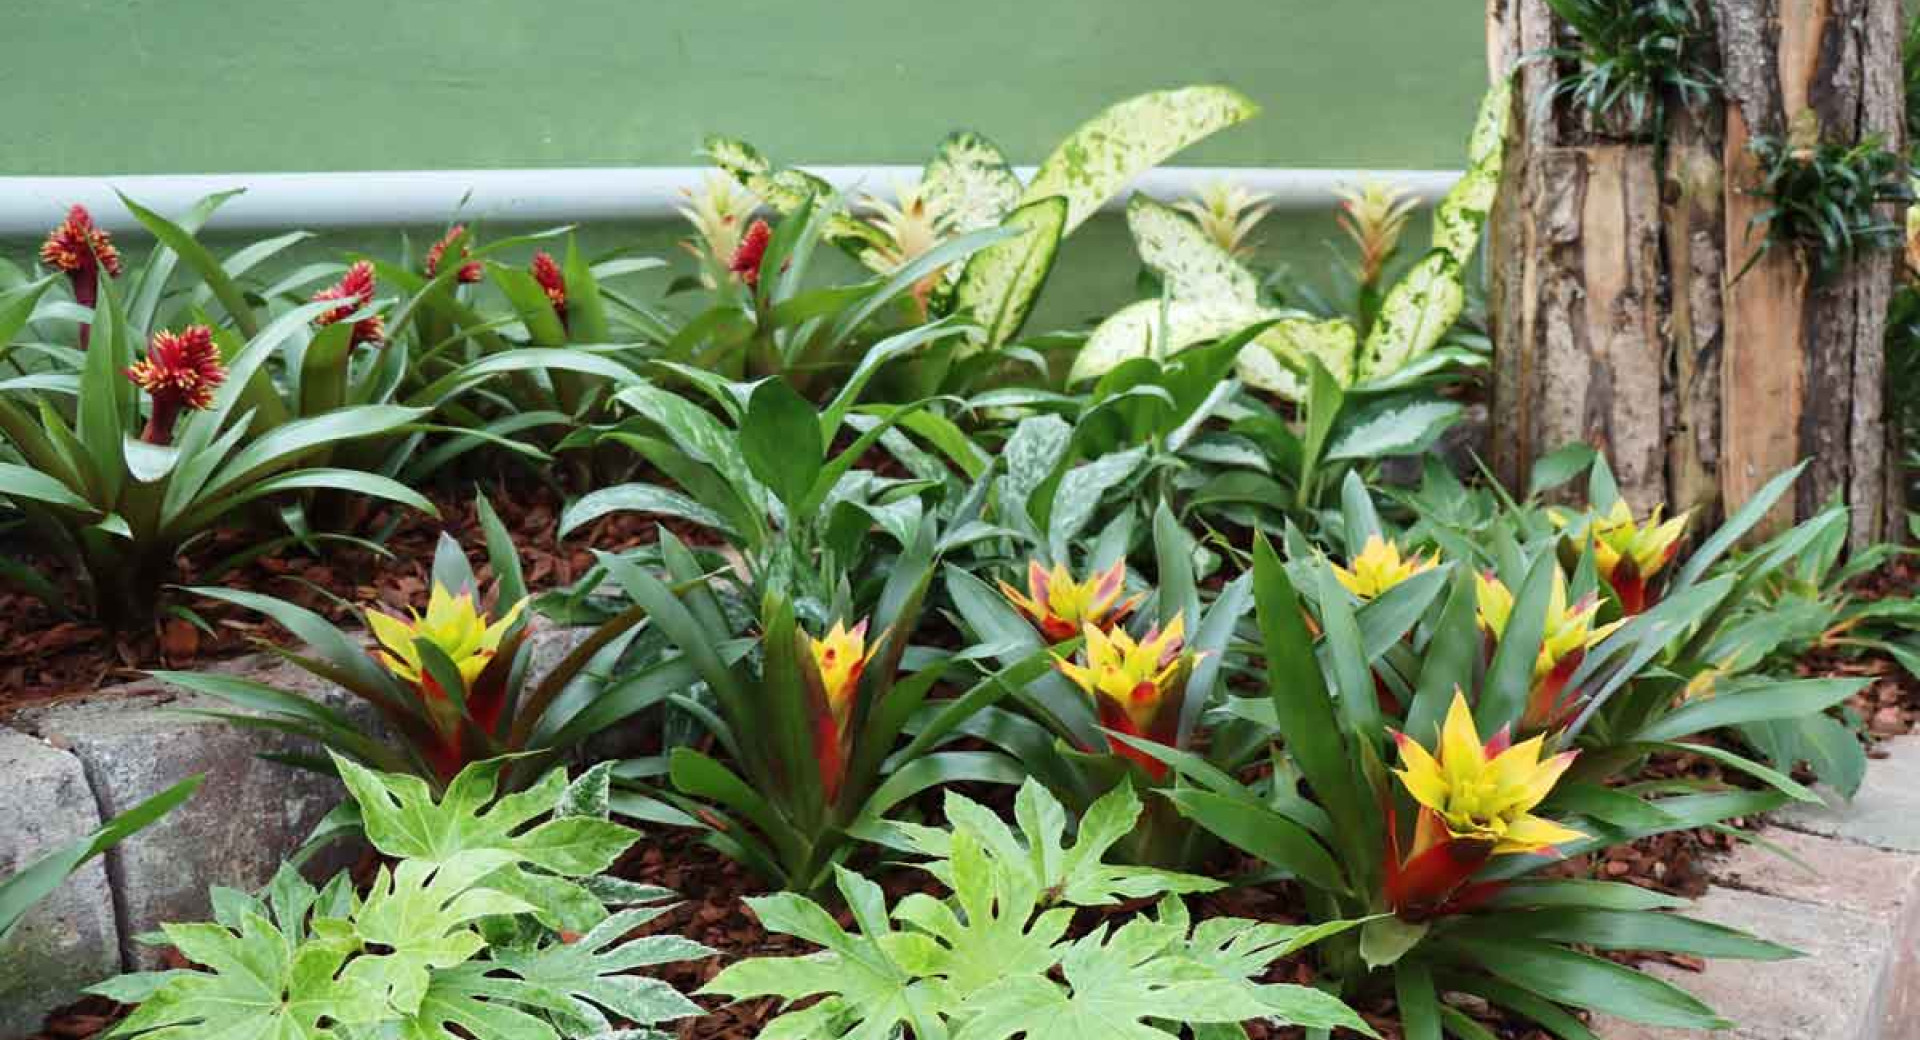 Green plants with pointy yellow and red flowers.